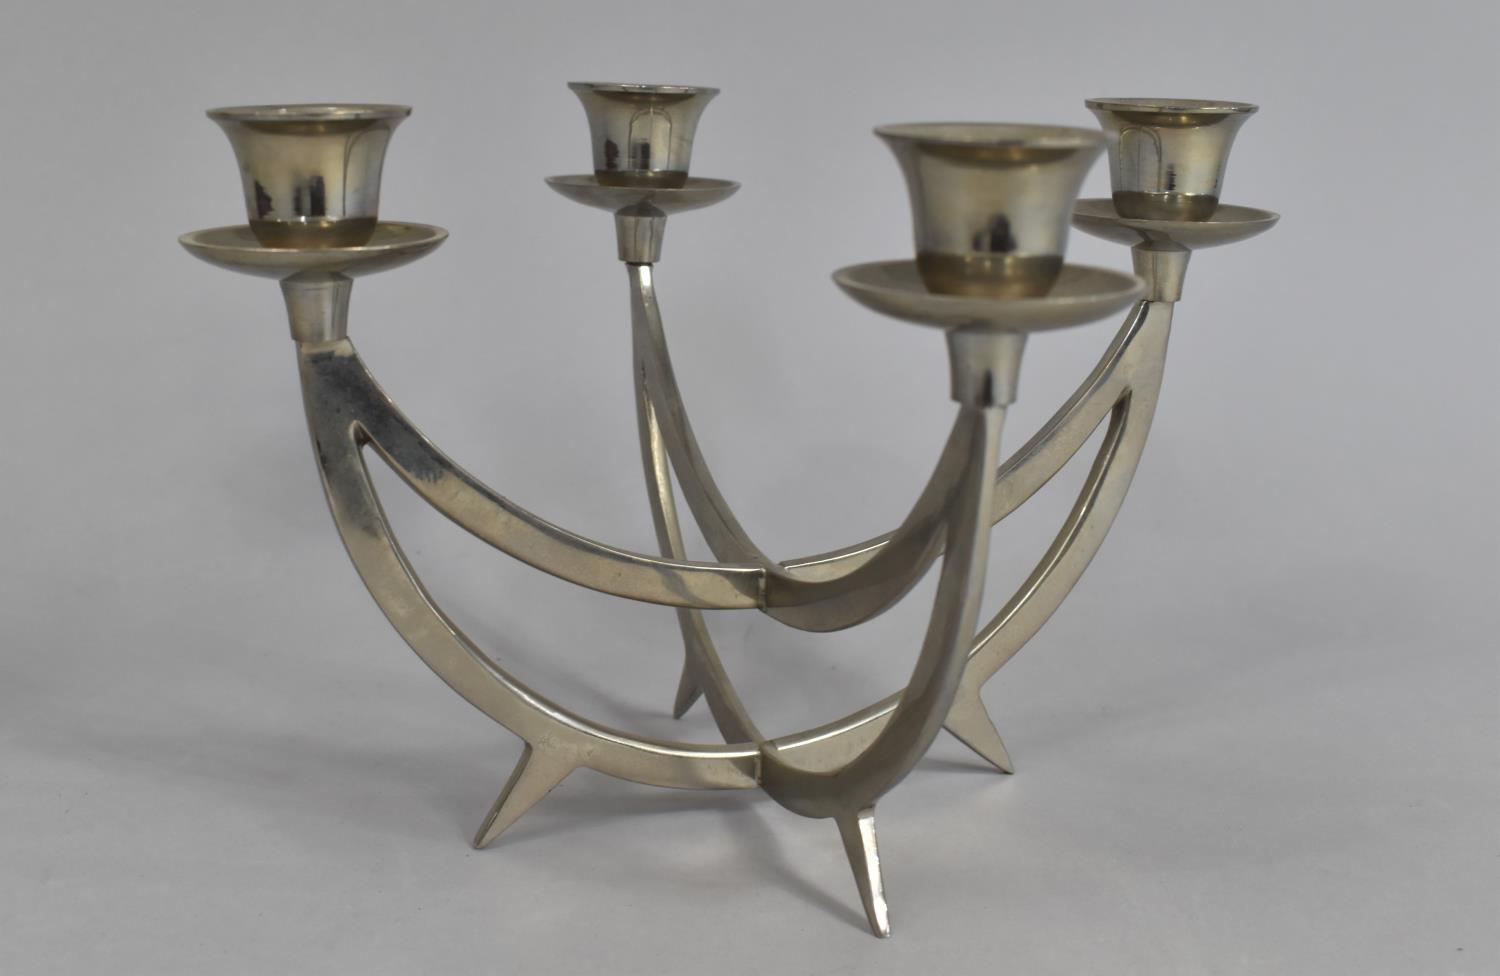 A Modern Scandinavian Style Four Branch Table Candelabra, 15cms High - Image 3 of 4